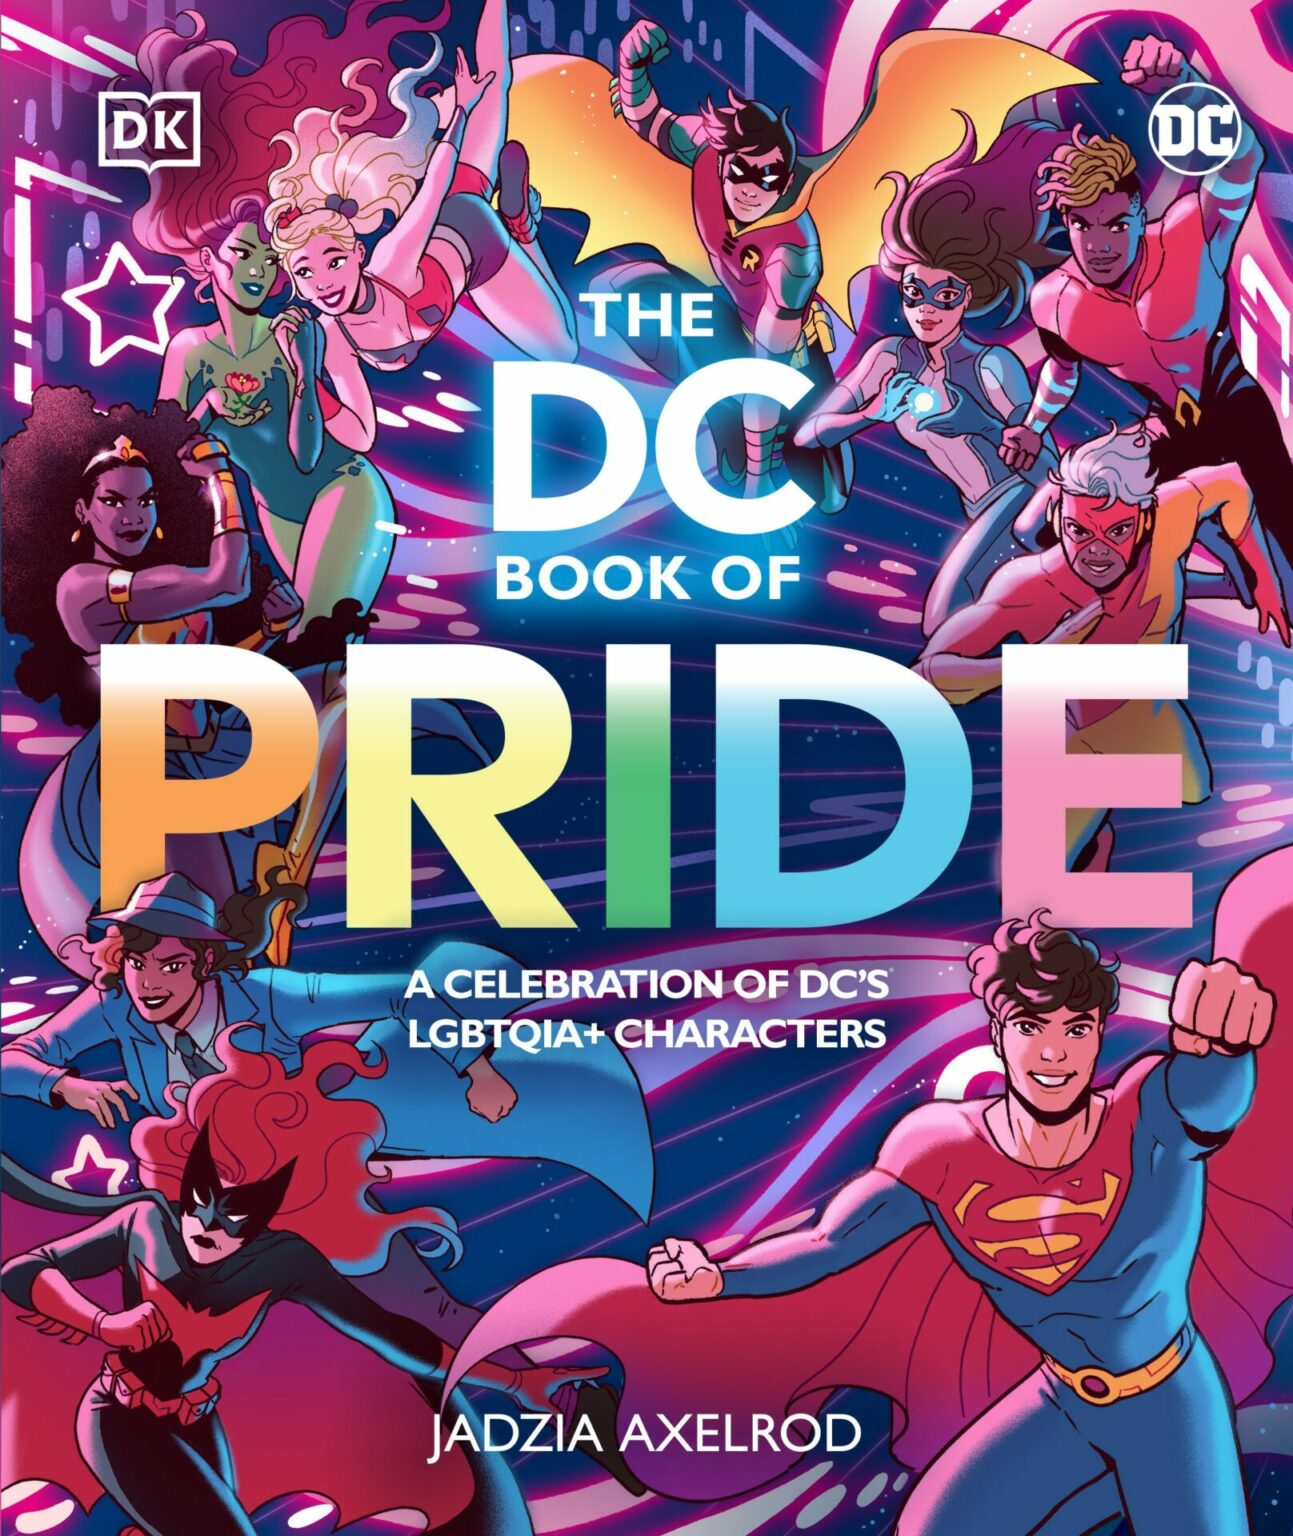 DC celebrates LGBTQ characters with new anthology Attitude